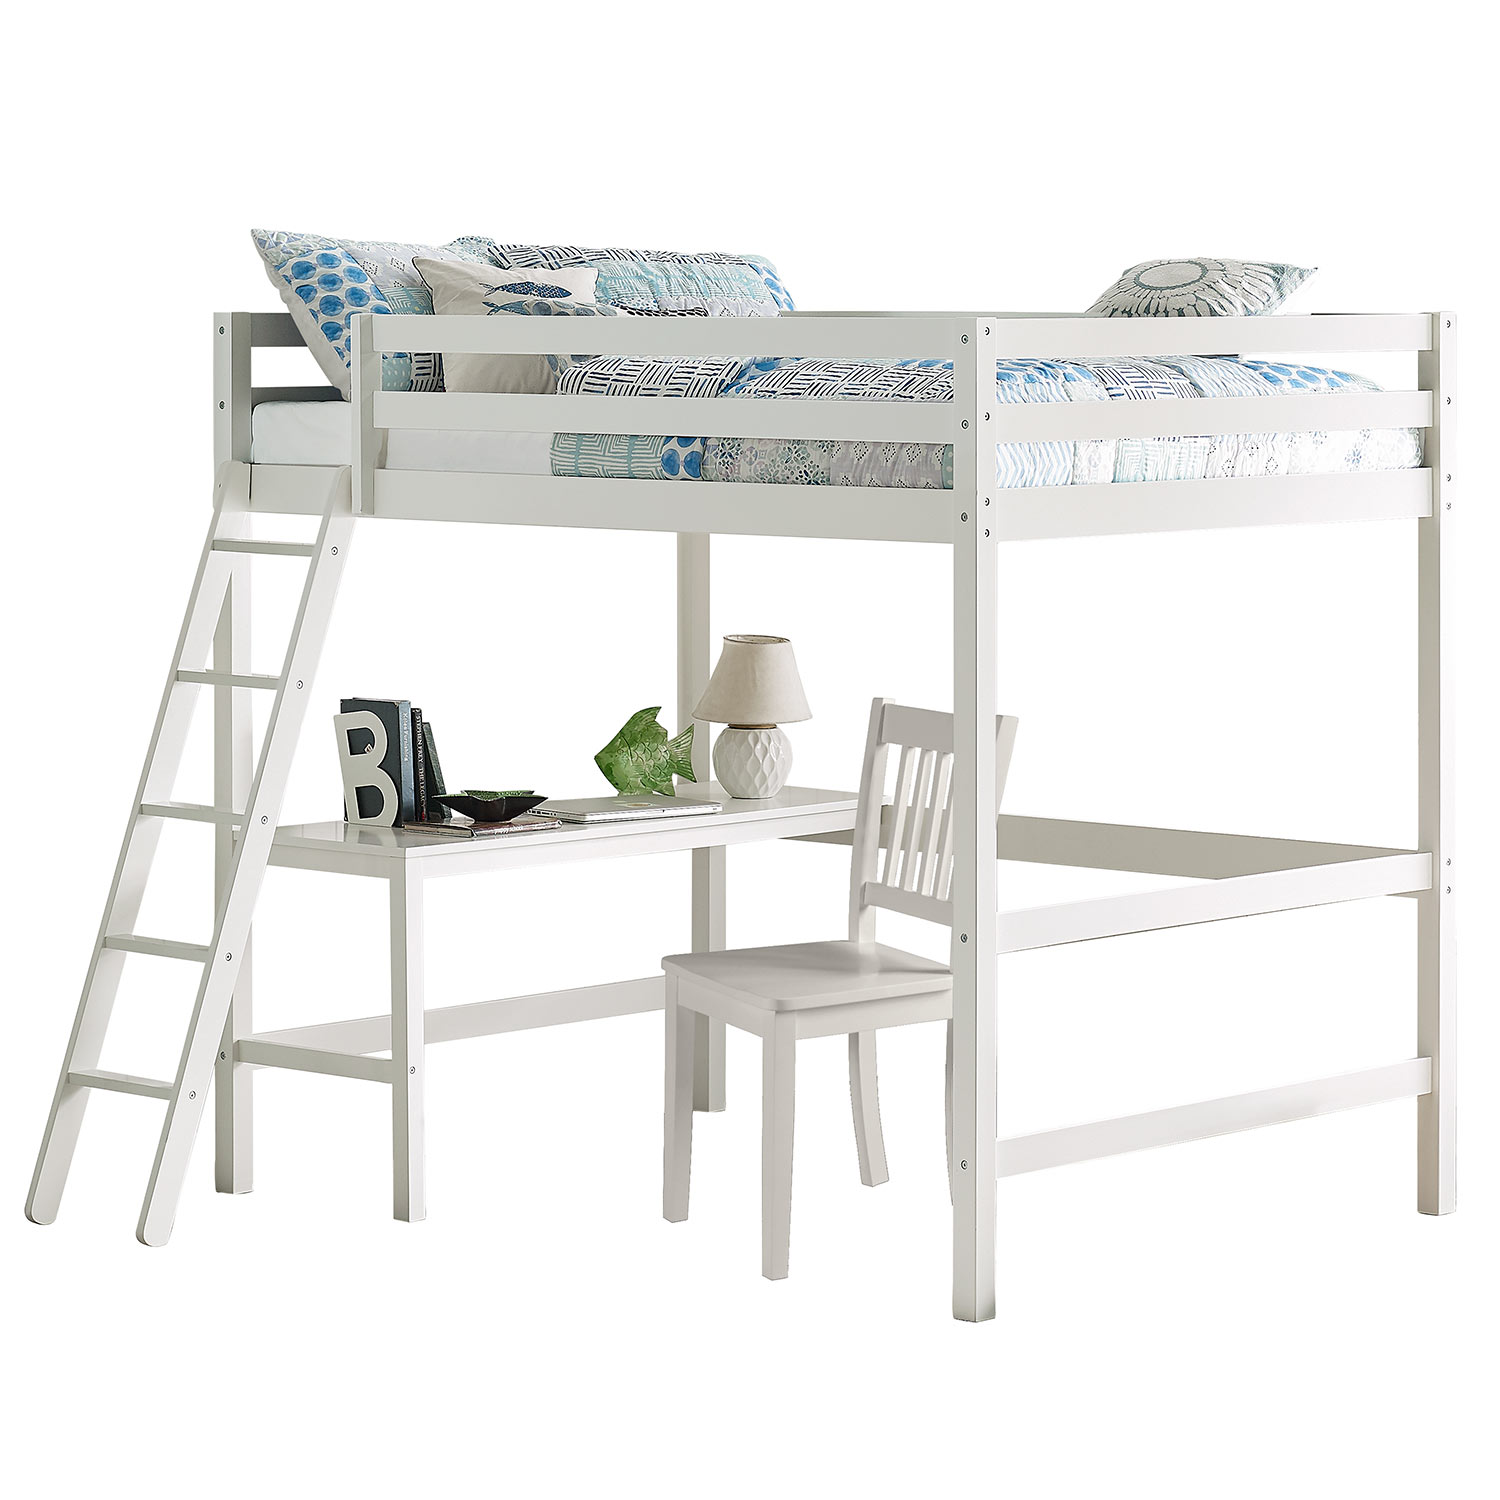 Hillsdale Caspian Full Loft Bed with Chair - White